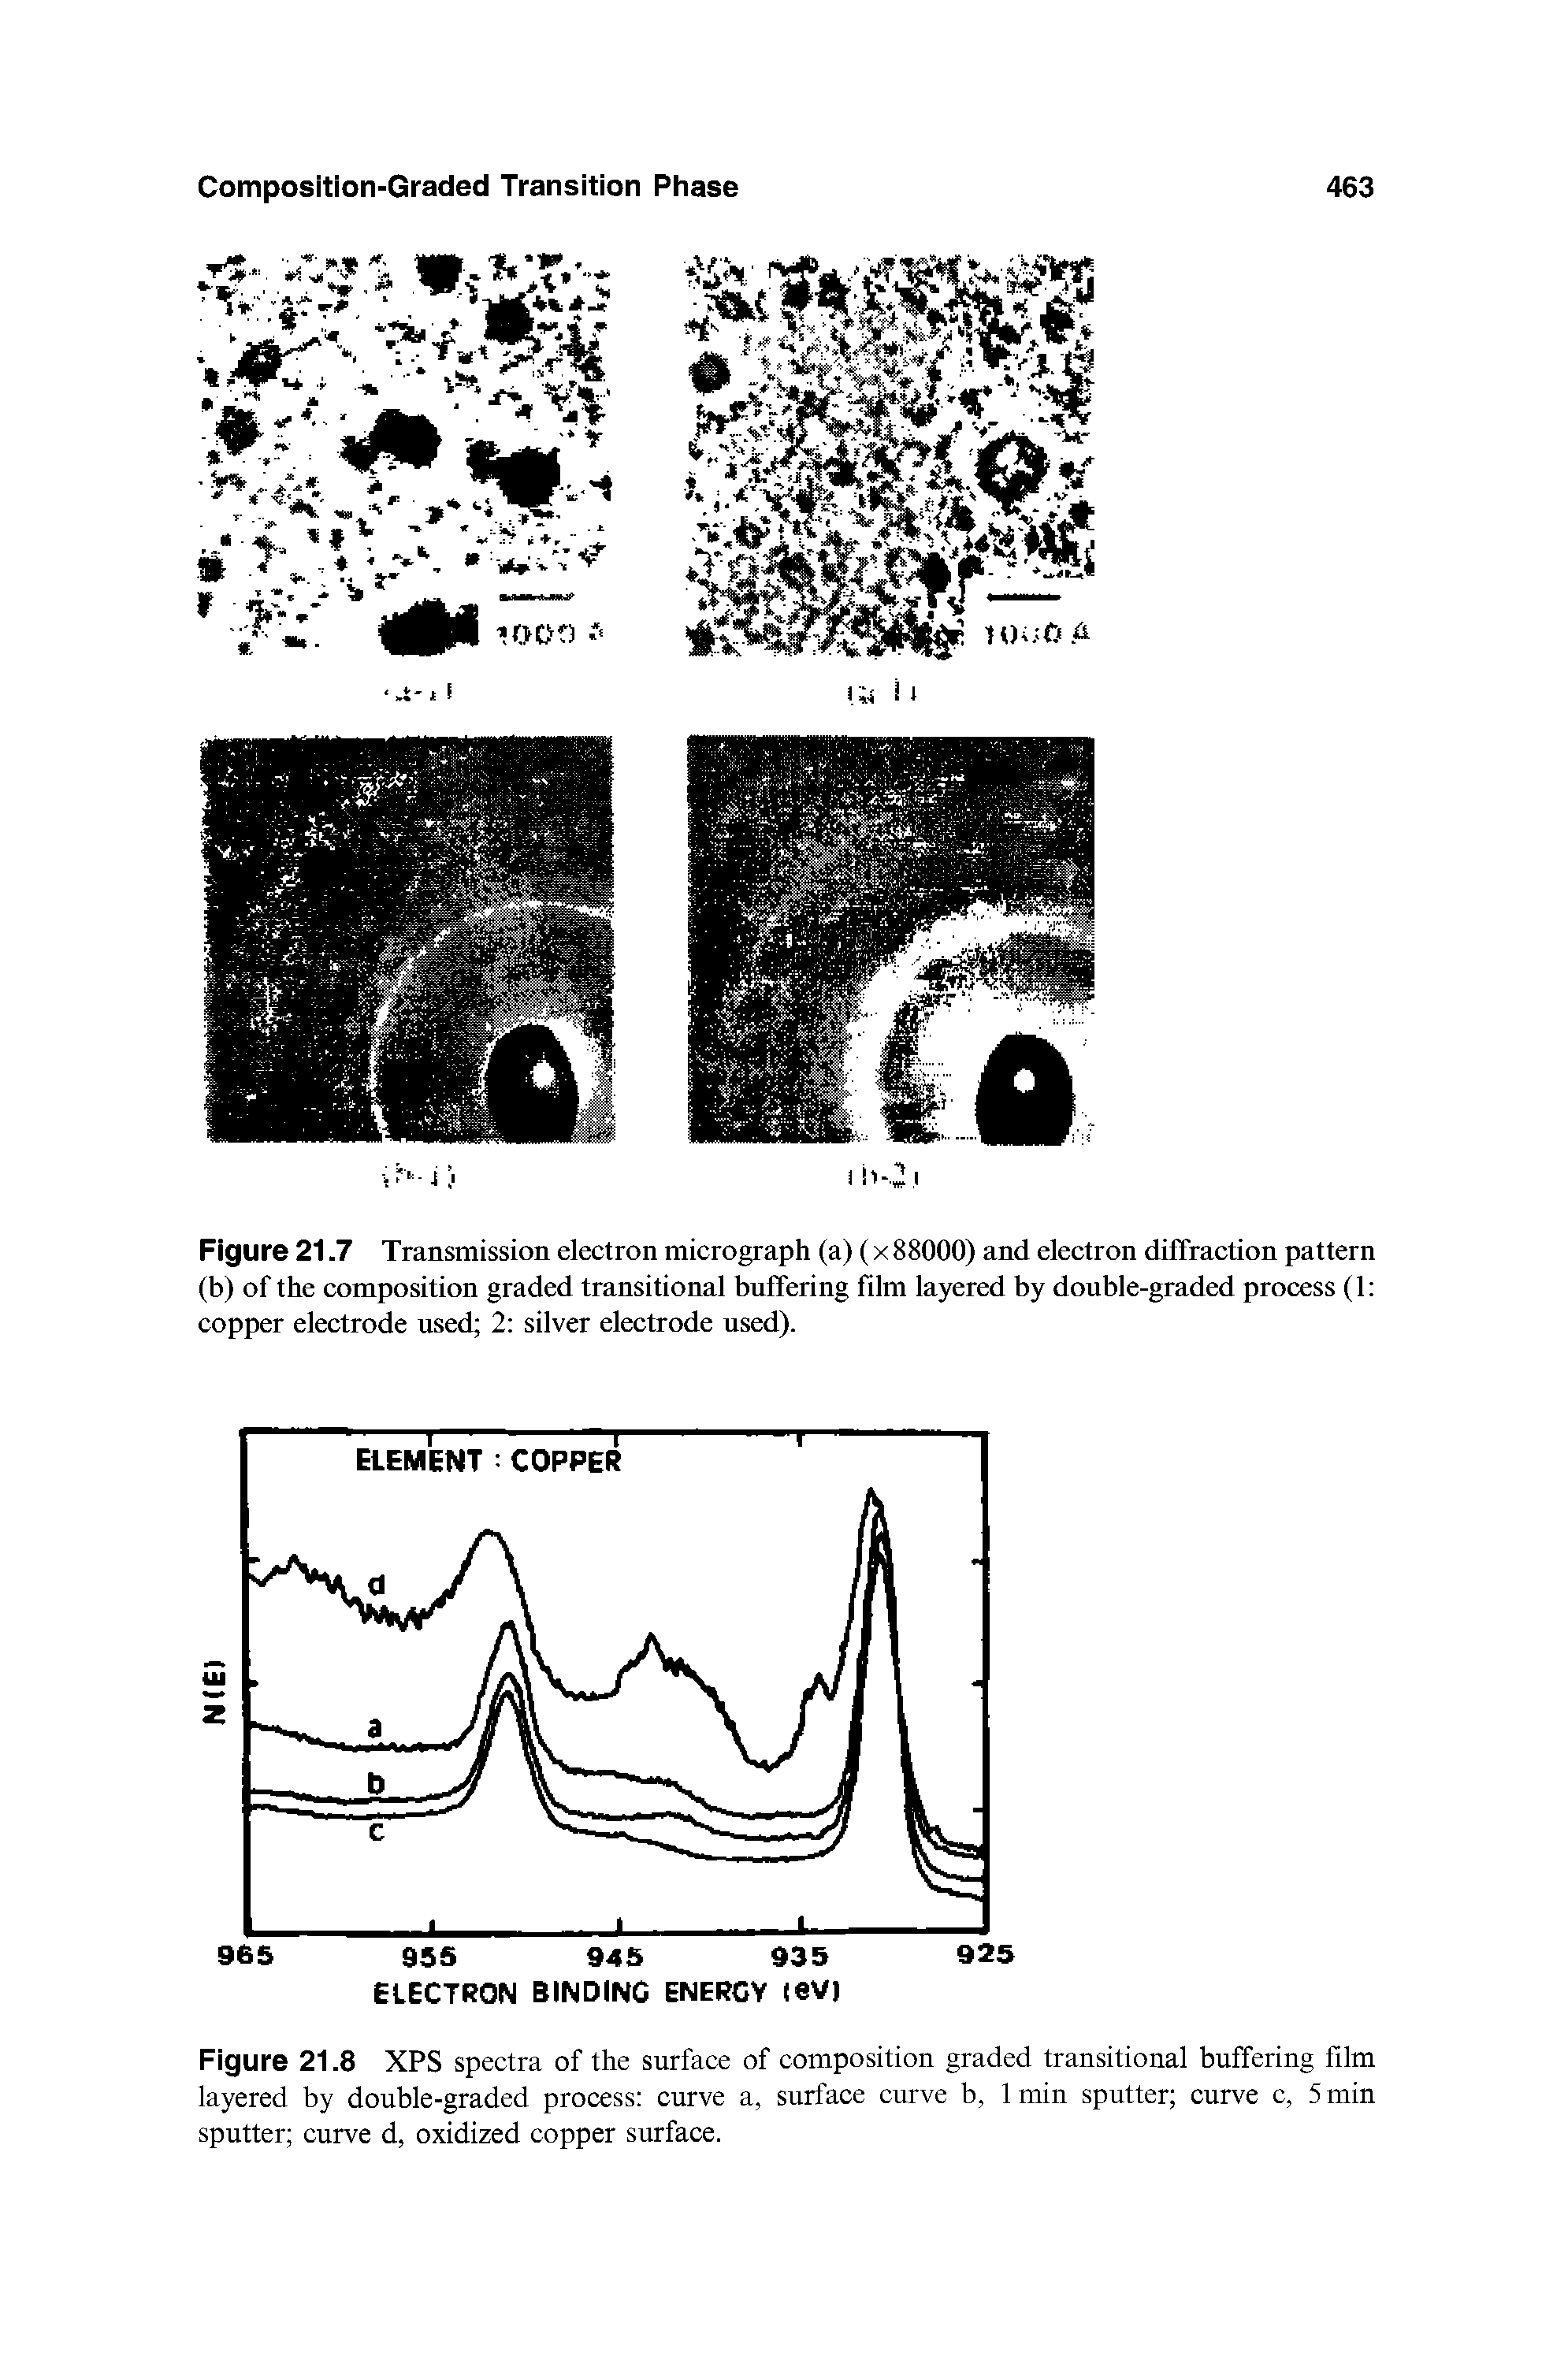 Figure 21.8 XPS spectra of the surface of composition graded transitional buffering film layered by double-graded process curve a, surface curve b, 1 min sputter curve c, 5 min sputter curve d, oxidized copper surface.